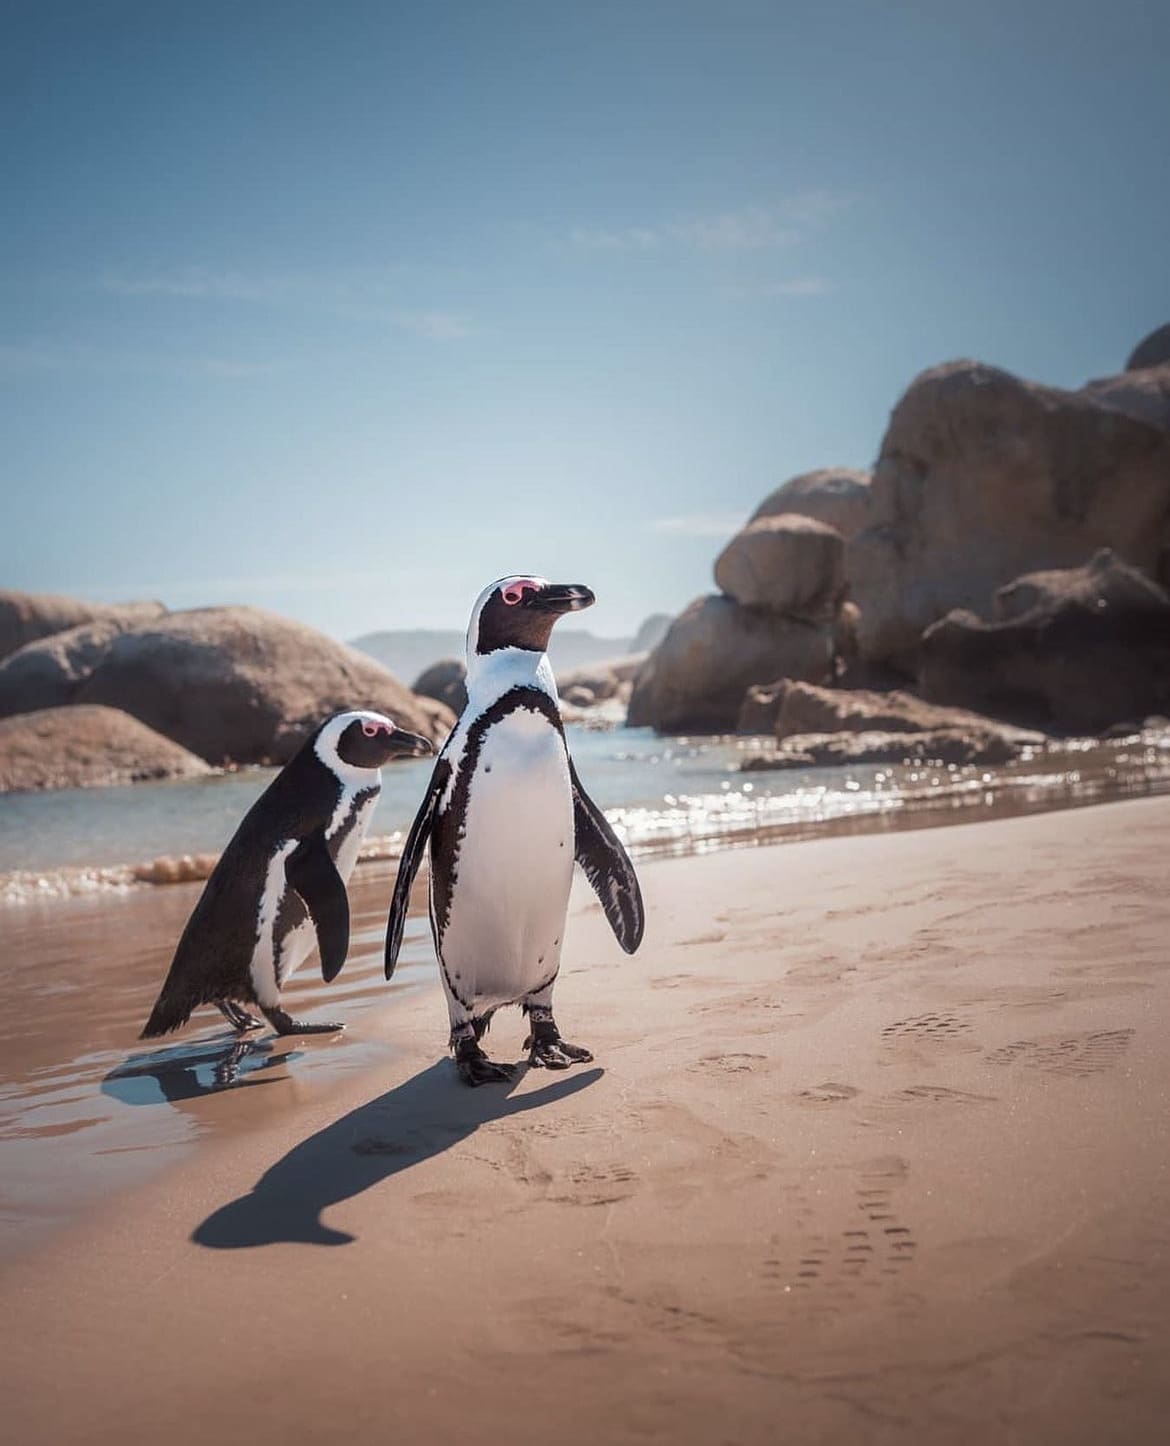 Penguins waddle along the shore, just a few feet from beachgoers